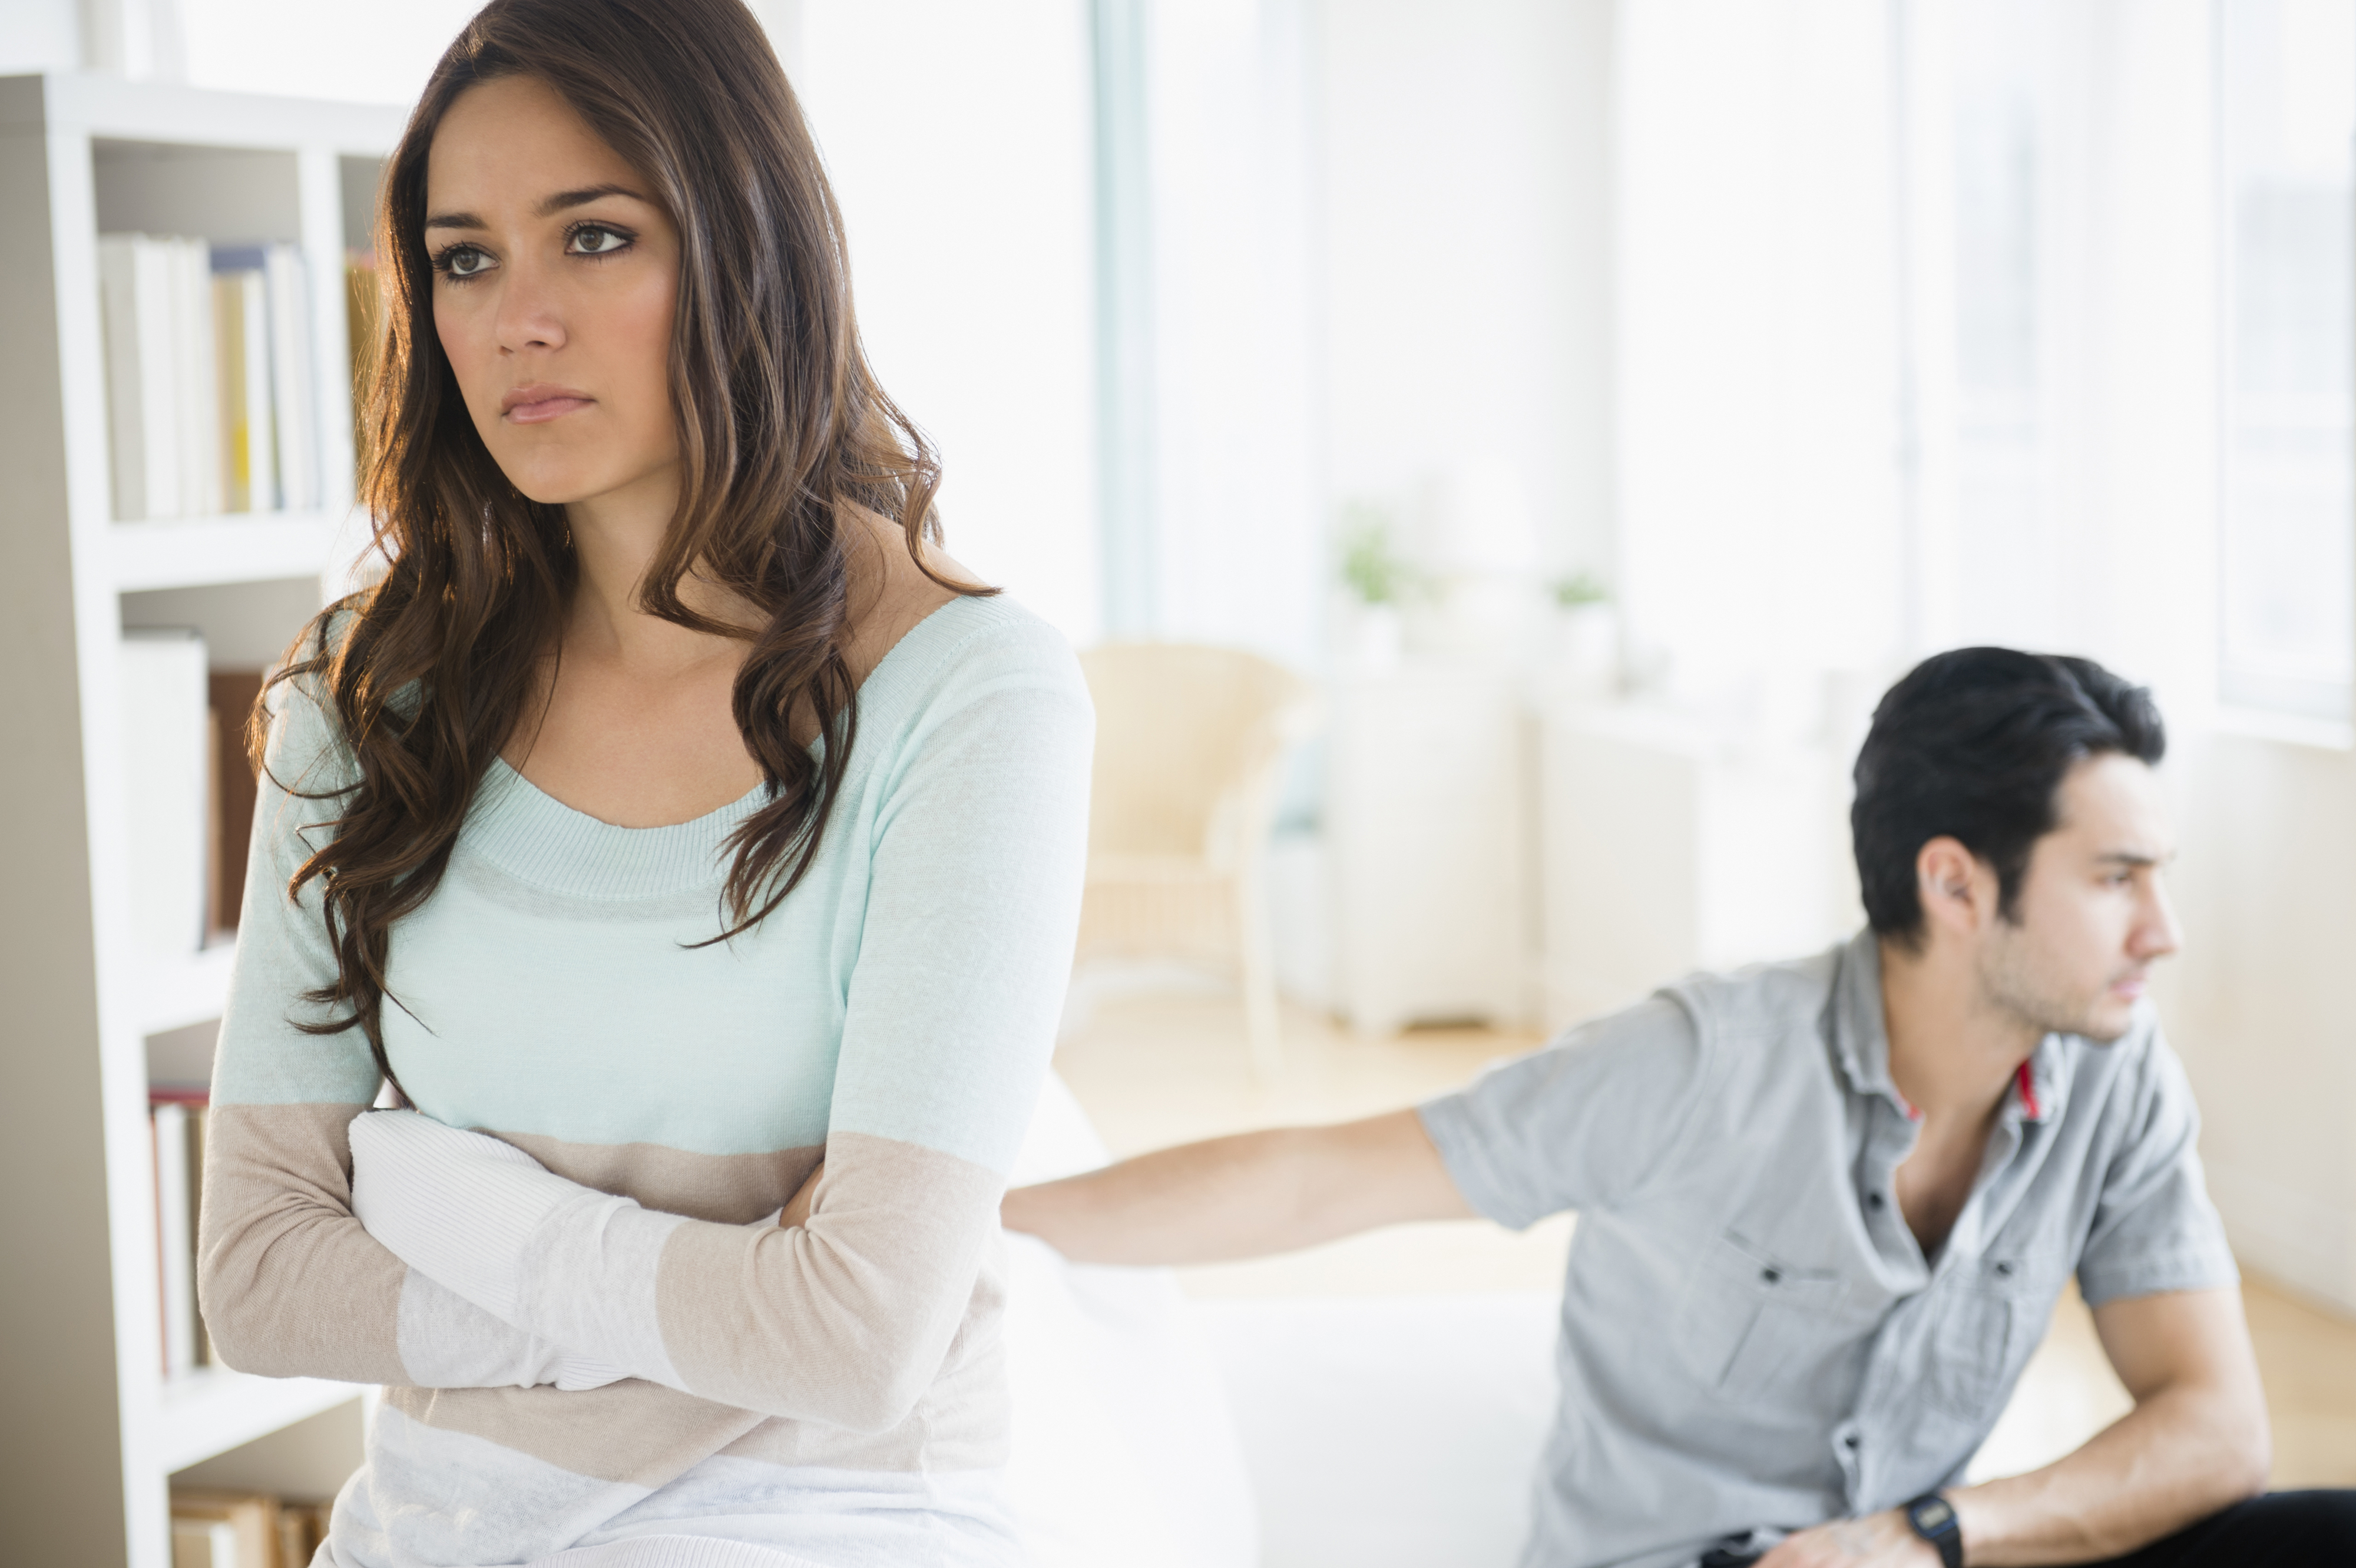 A woman and man in a relationship argue at home